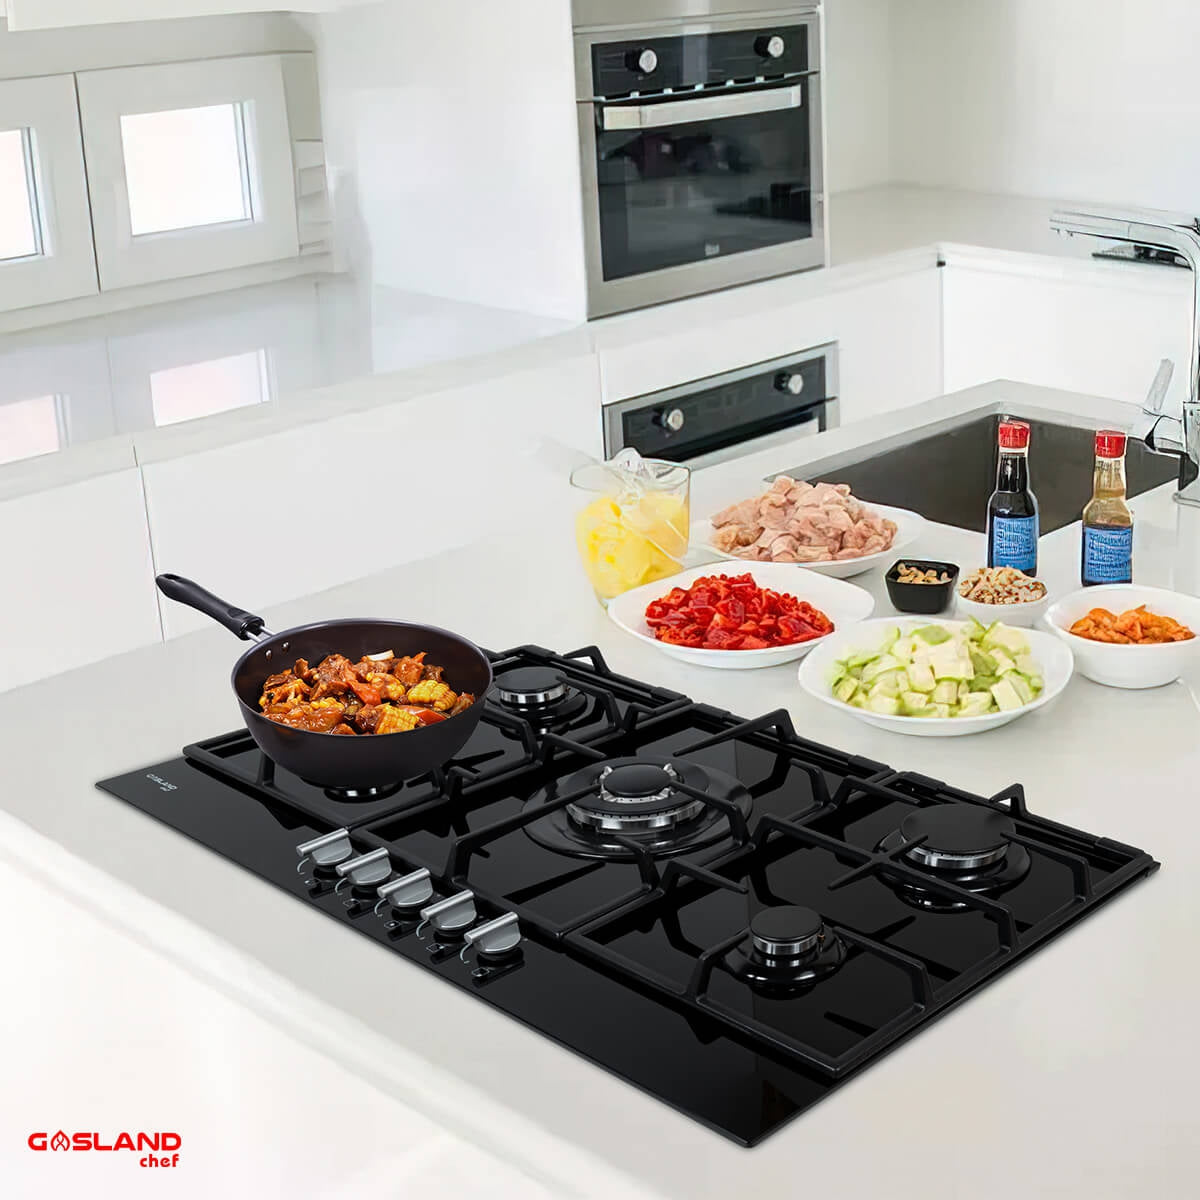 Kitchen & Outdoors Appliance-How To Choose Gas Cooktops: Things You Must Consider-GASLAND Chef